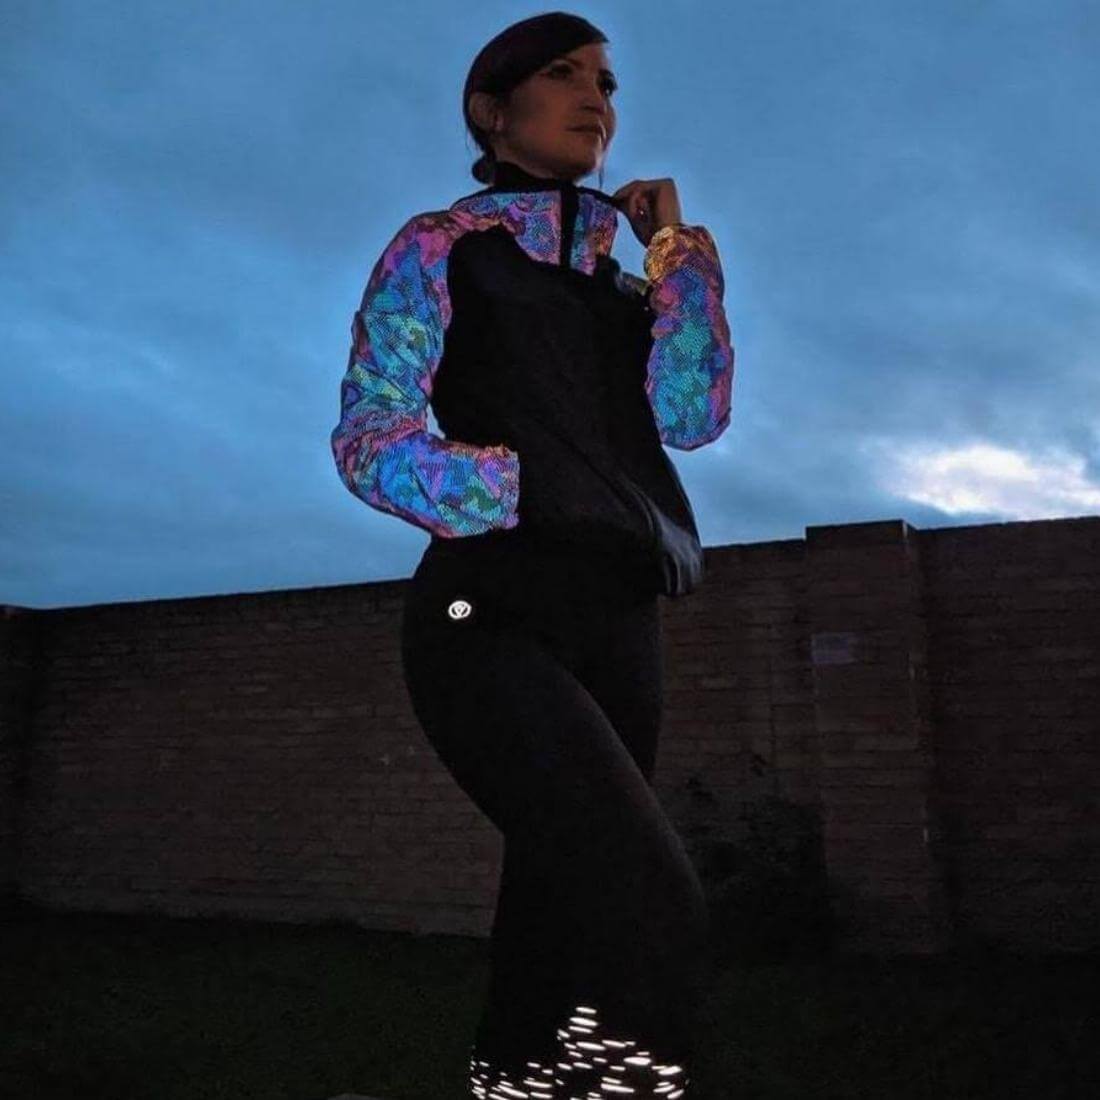 Shop our full range of running clothing to keep you visible with reflective details and neon colours. Moisture wicking, breathable and designed to be moved in. Womens and Mens Run Clothing